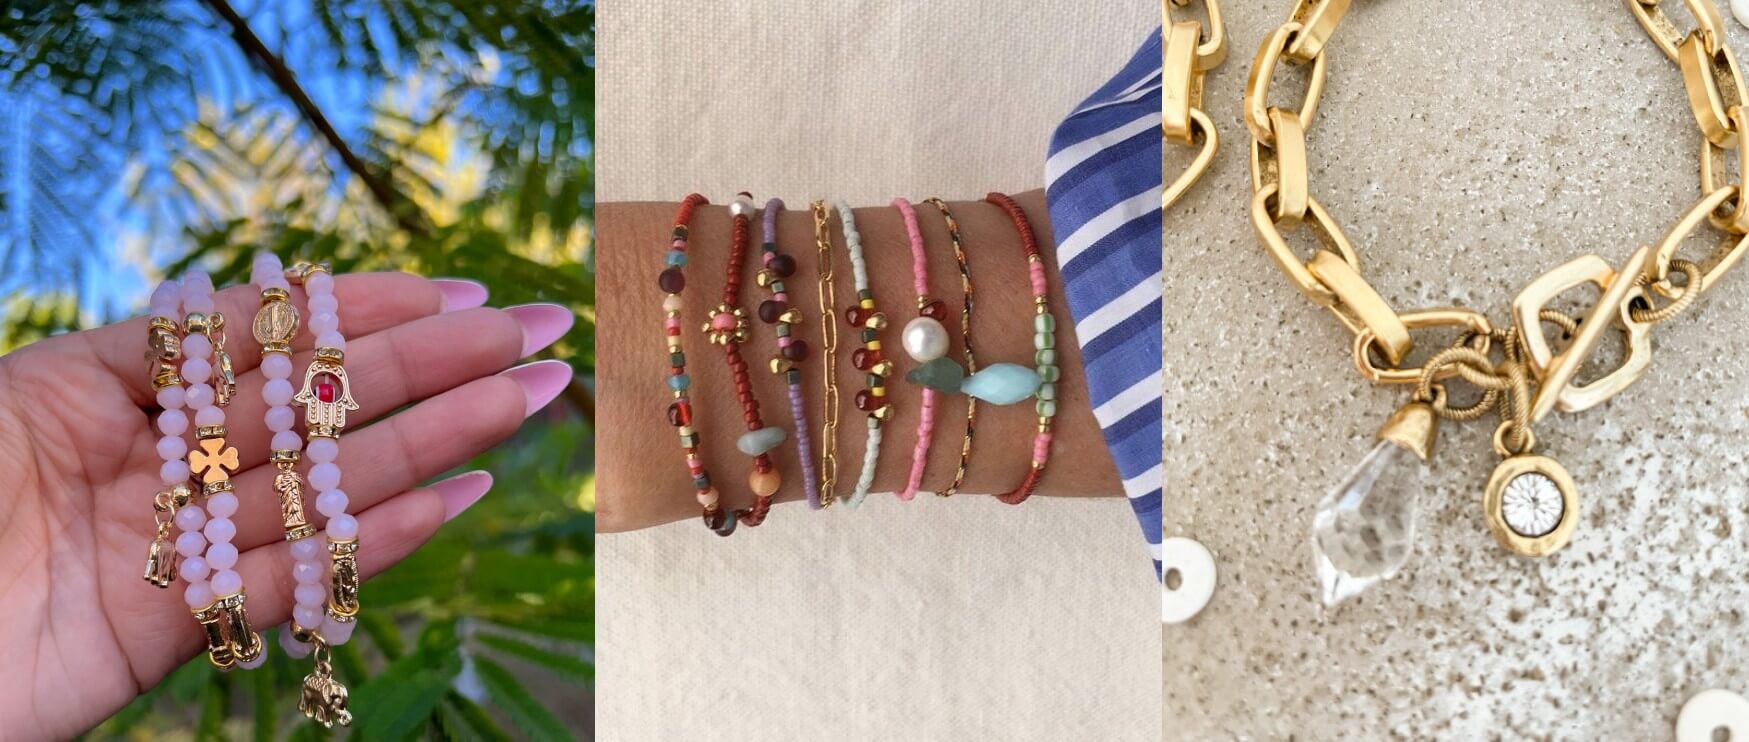 How to wear crystal & gem charm bracelets for the coconut girl aesthetic